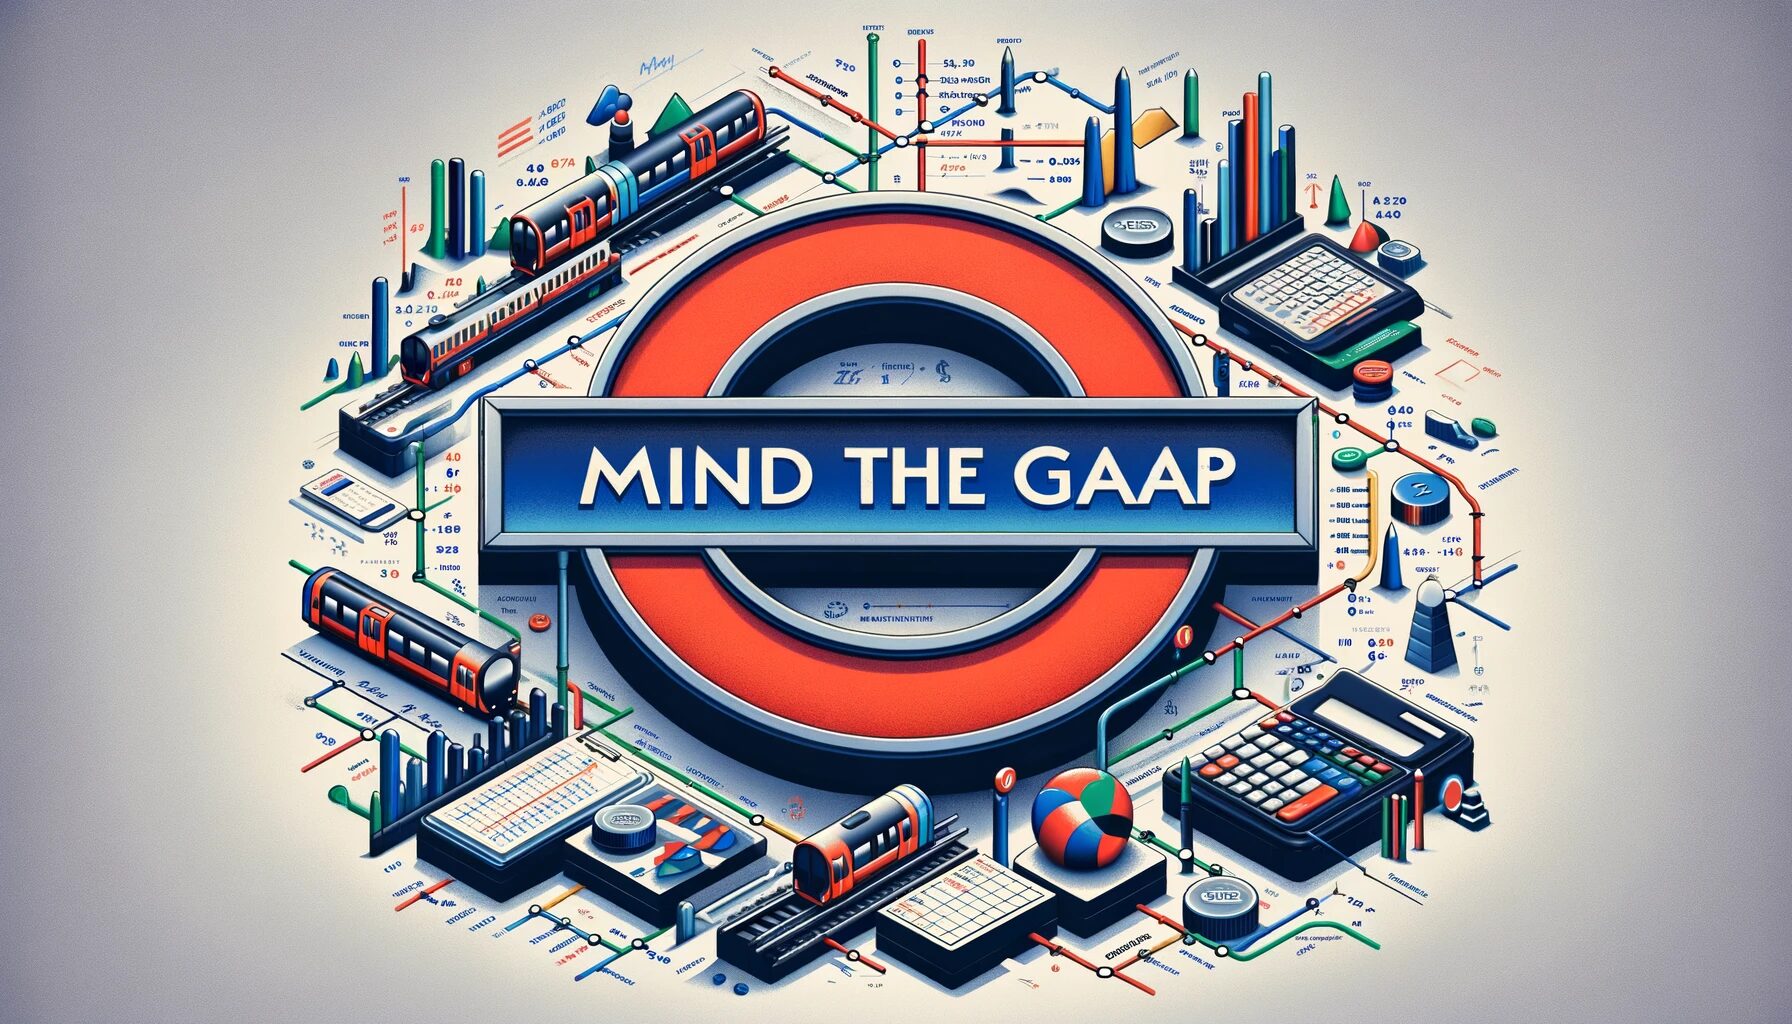 Mind the GAAP - UK Accounting regulations